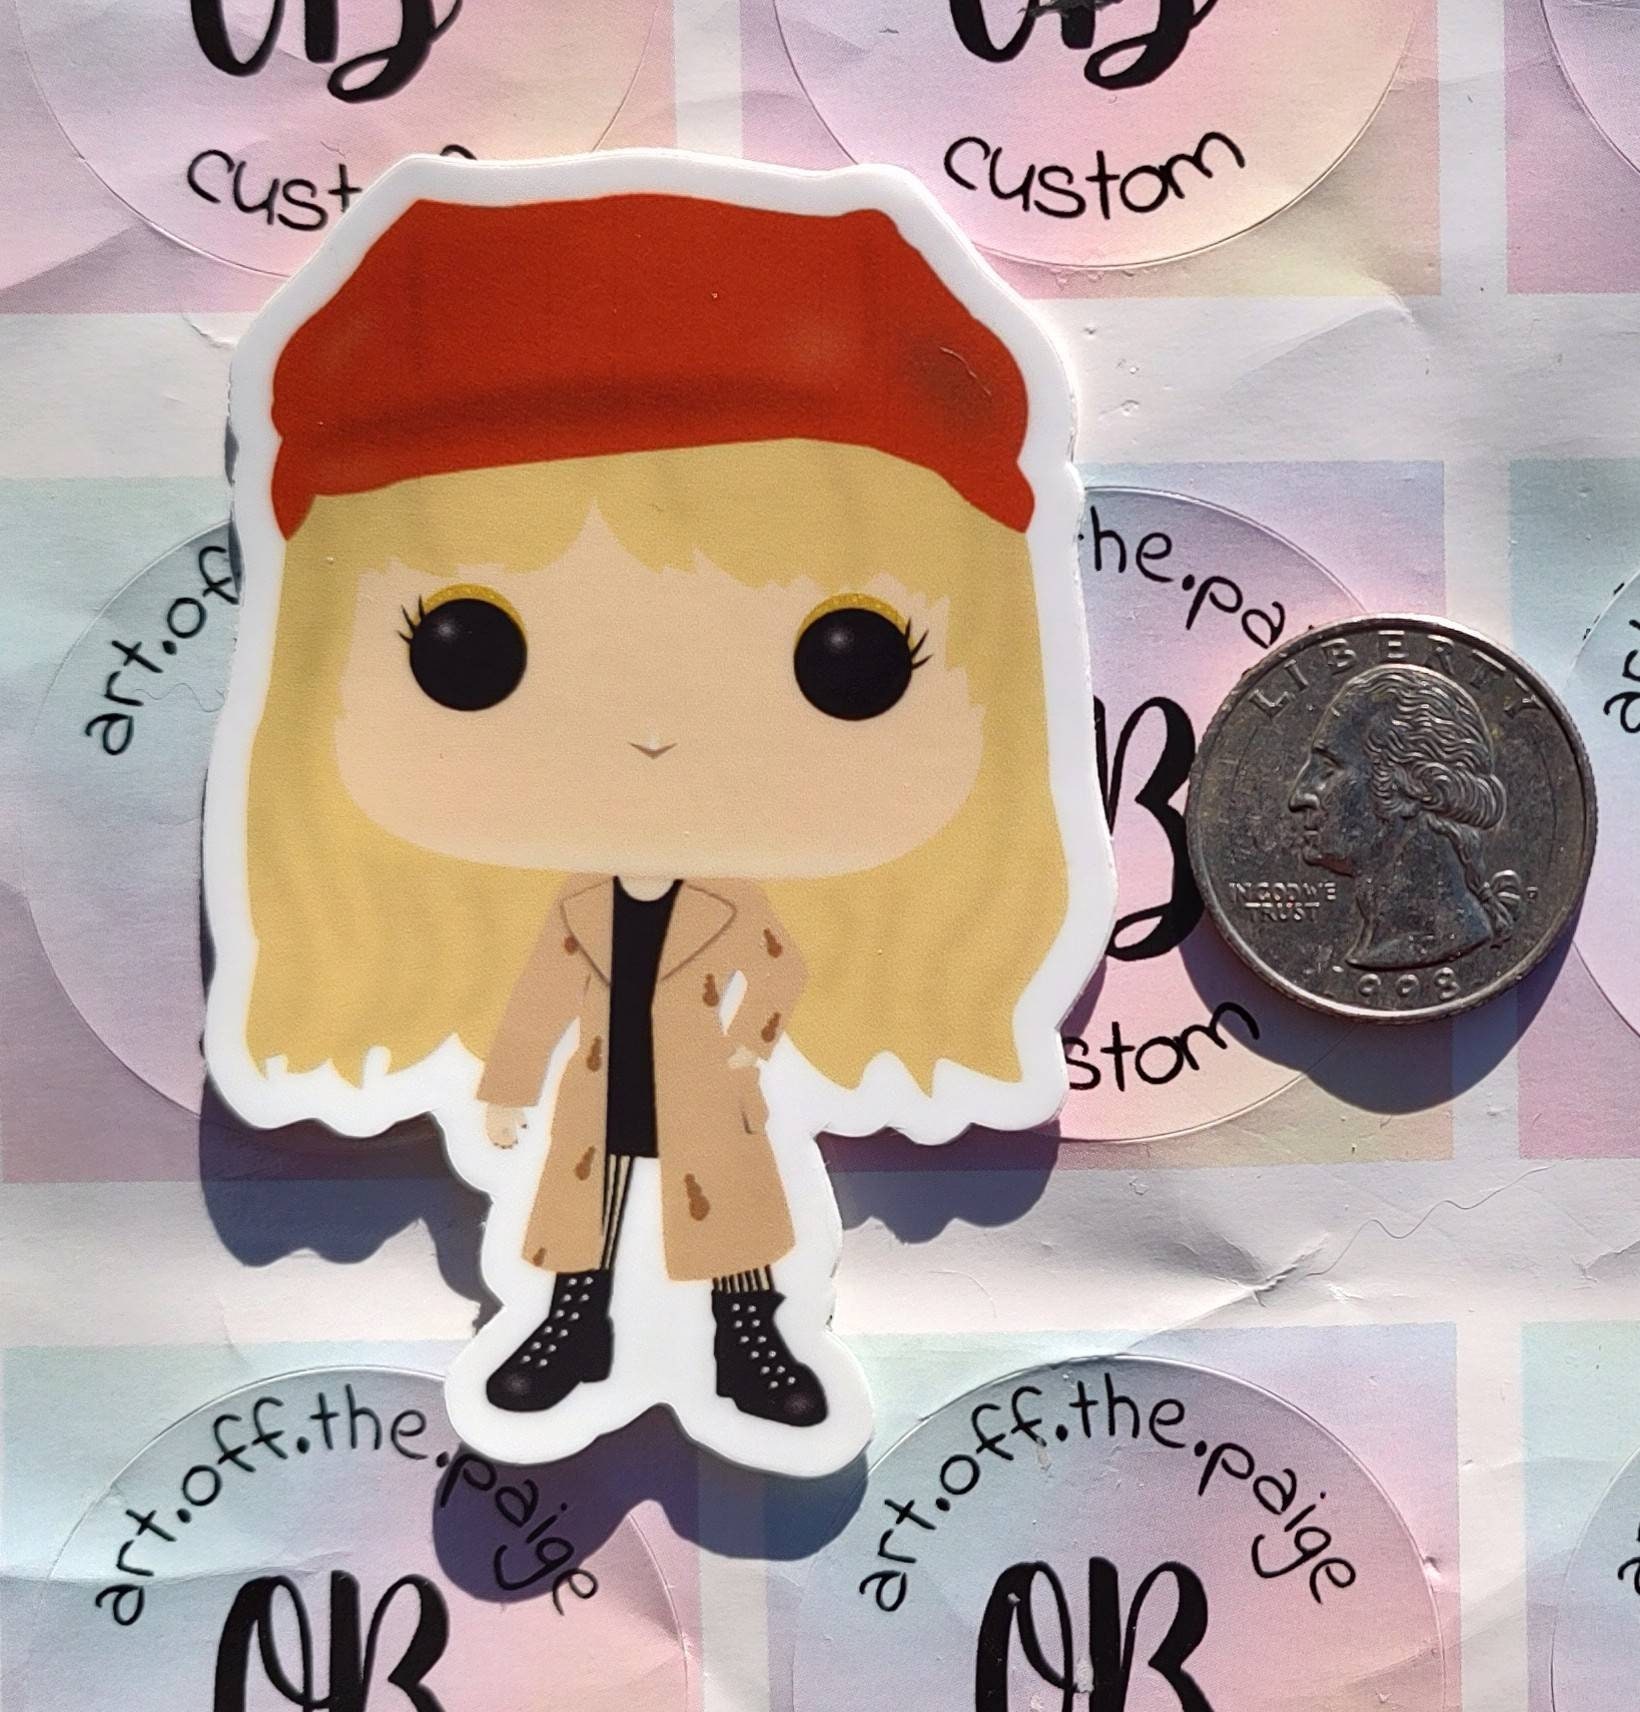 Make a 1989 era Taylor Swift funko pop with me! 1989 is my favorite er